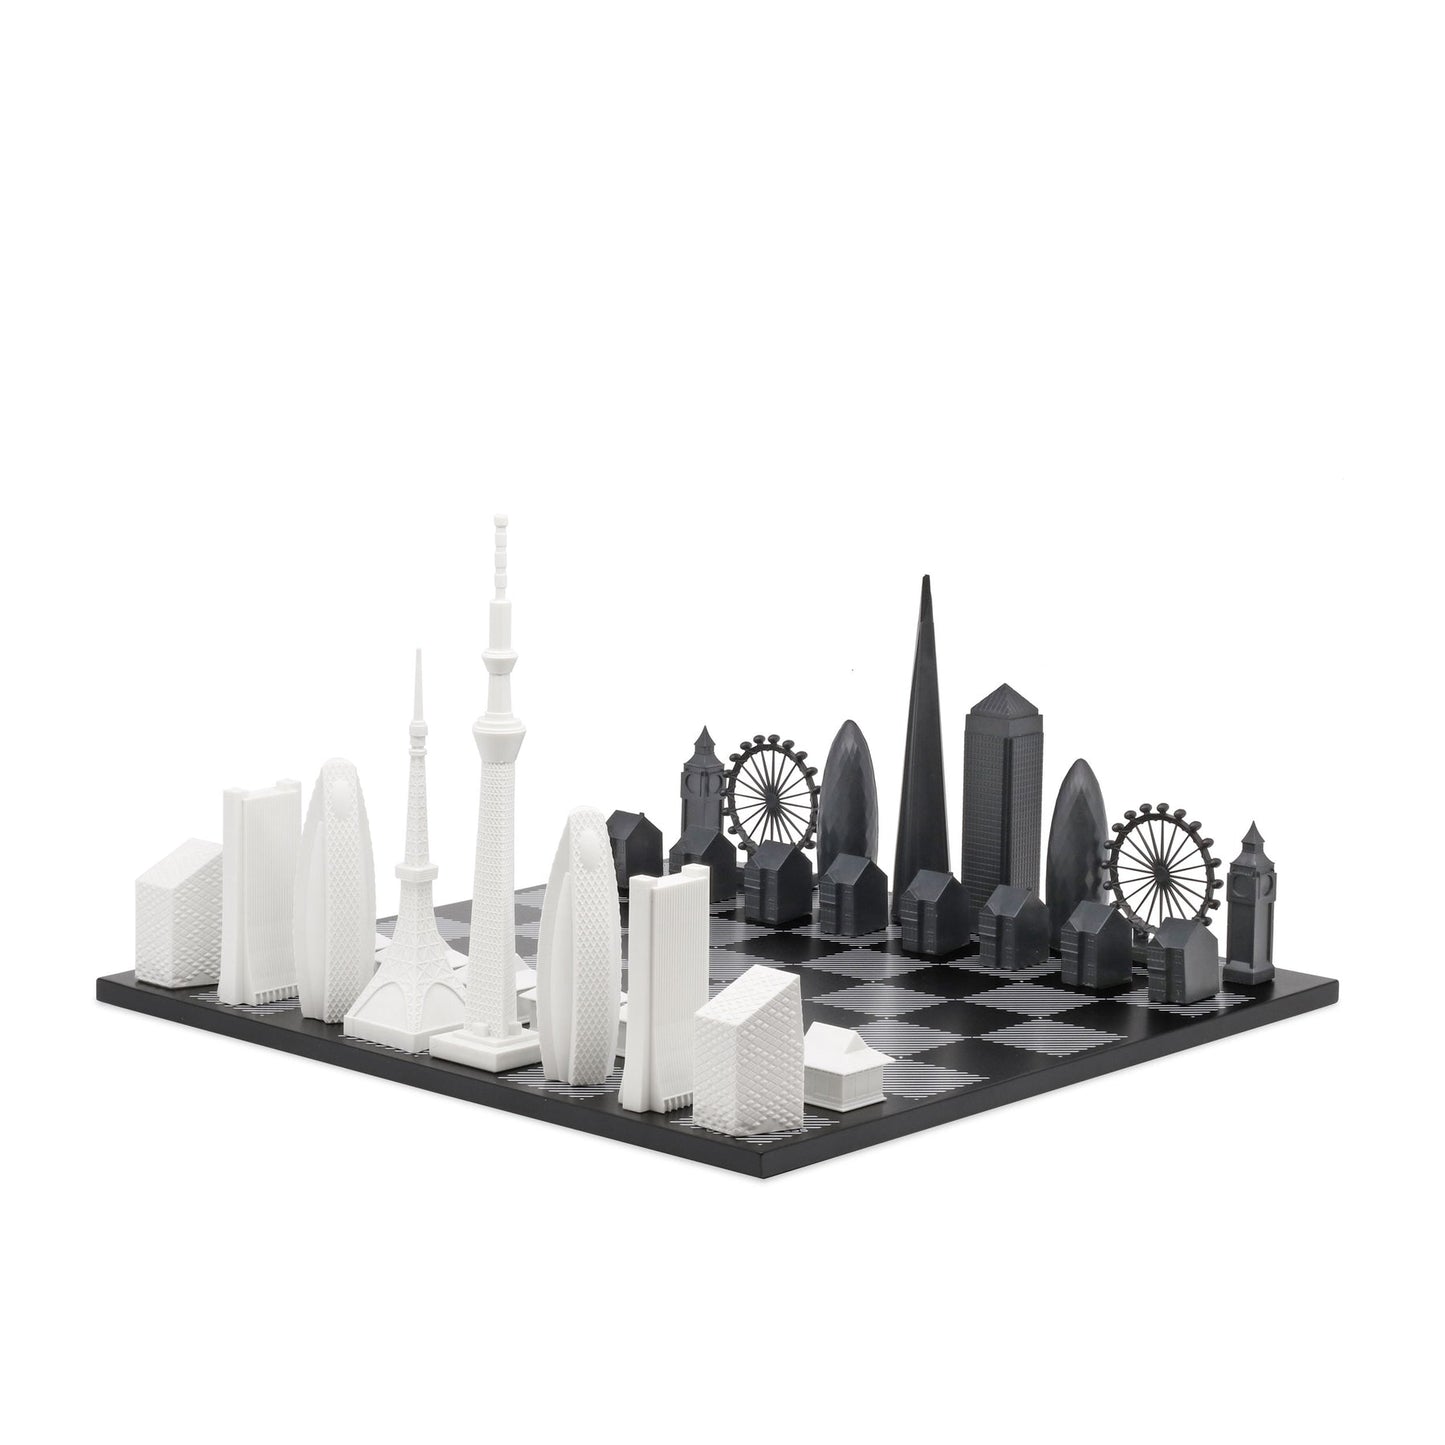 Special Edition Chess Set London vs New York on Black/White Hatch Board